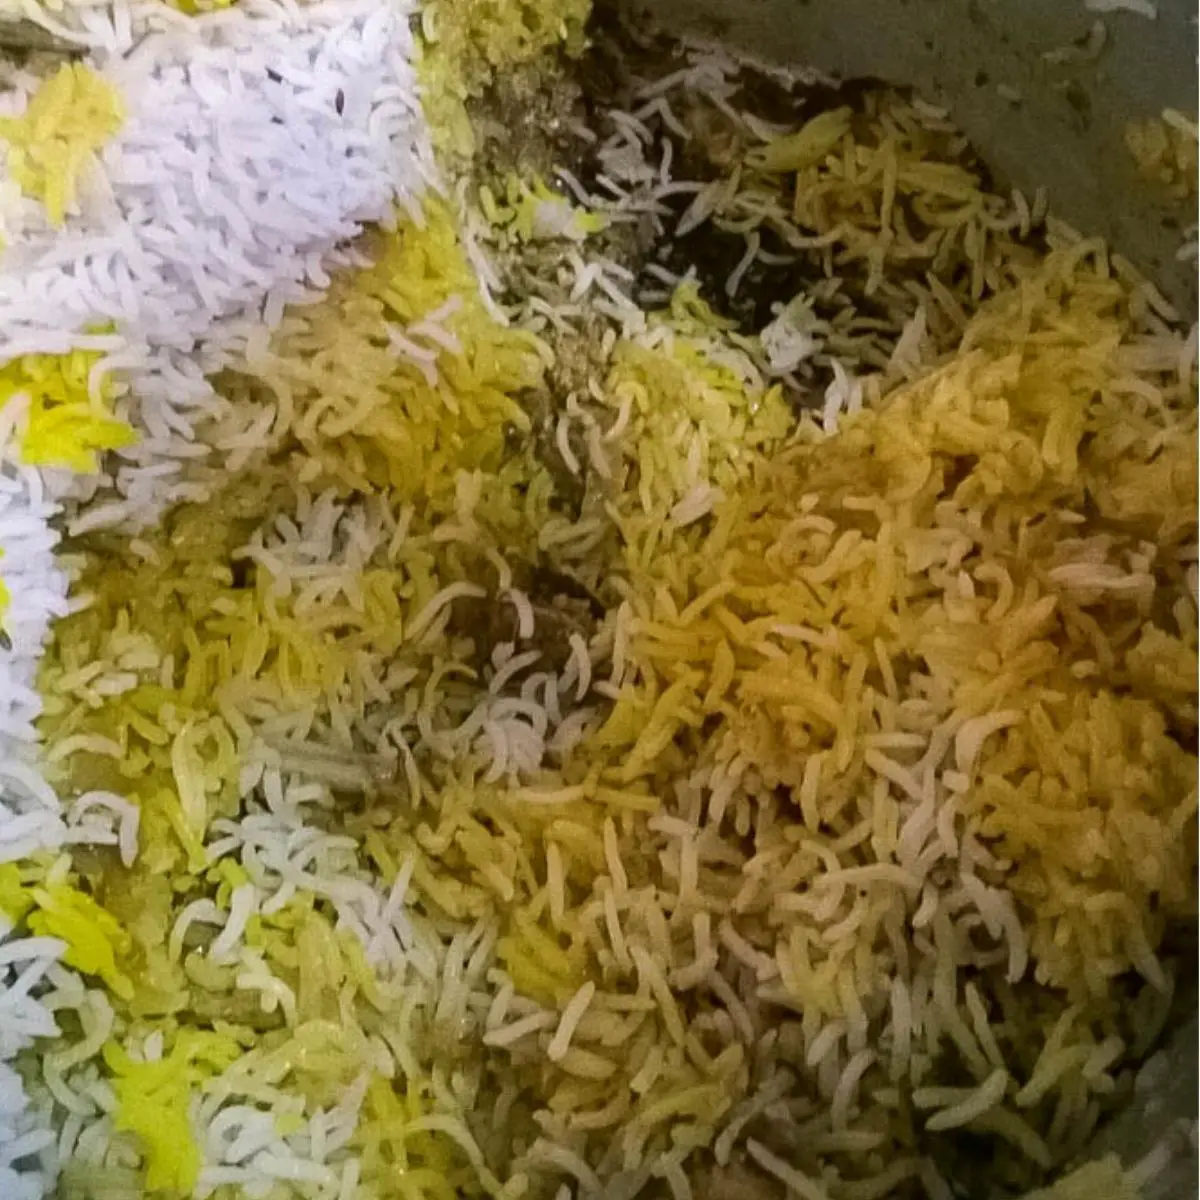 A pot of biryani cooking with mutton.